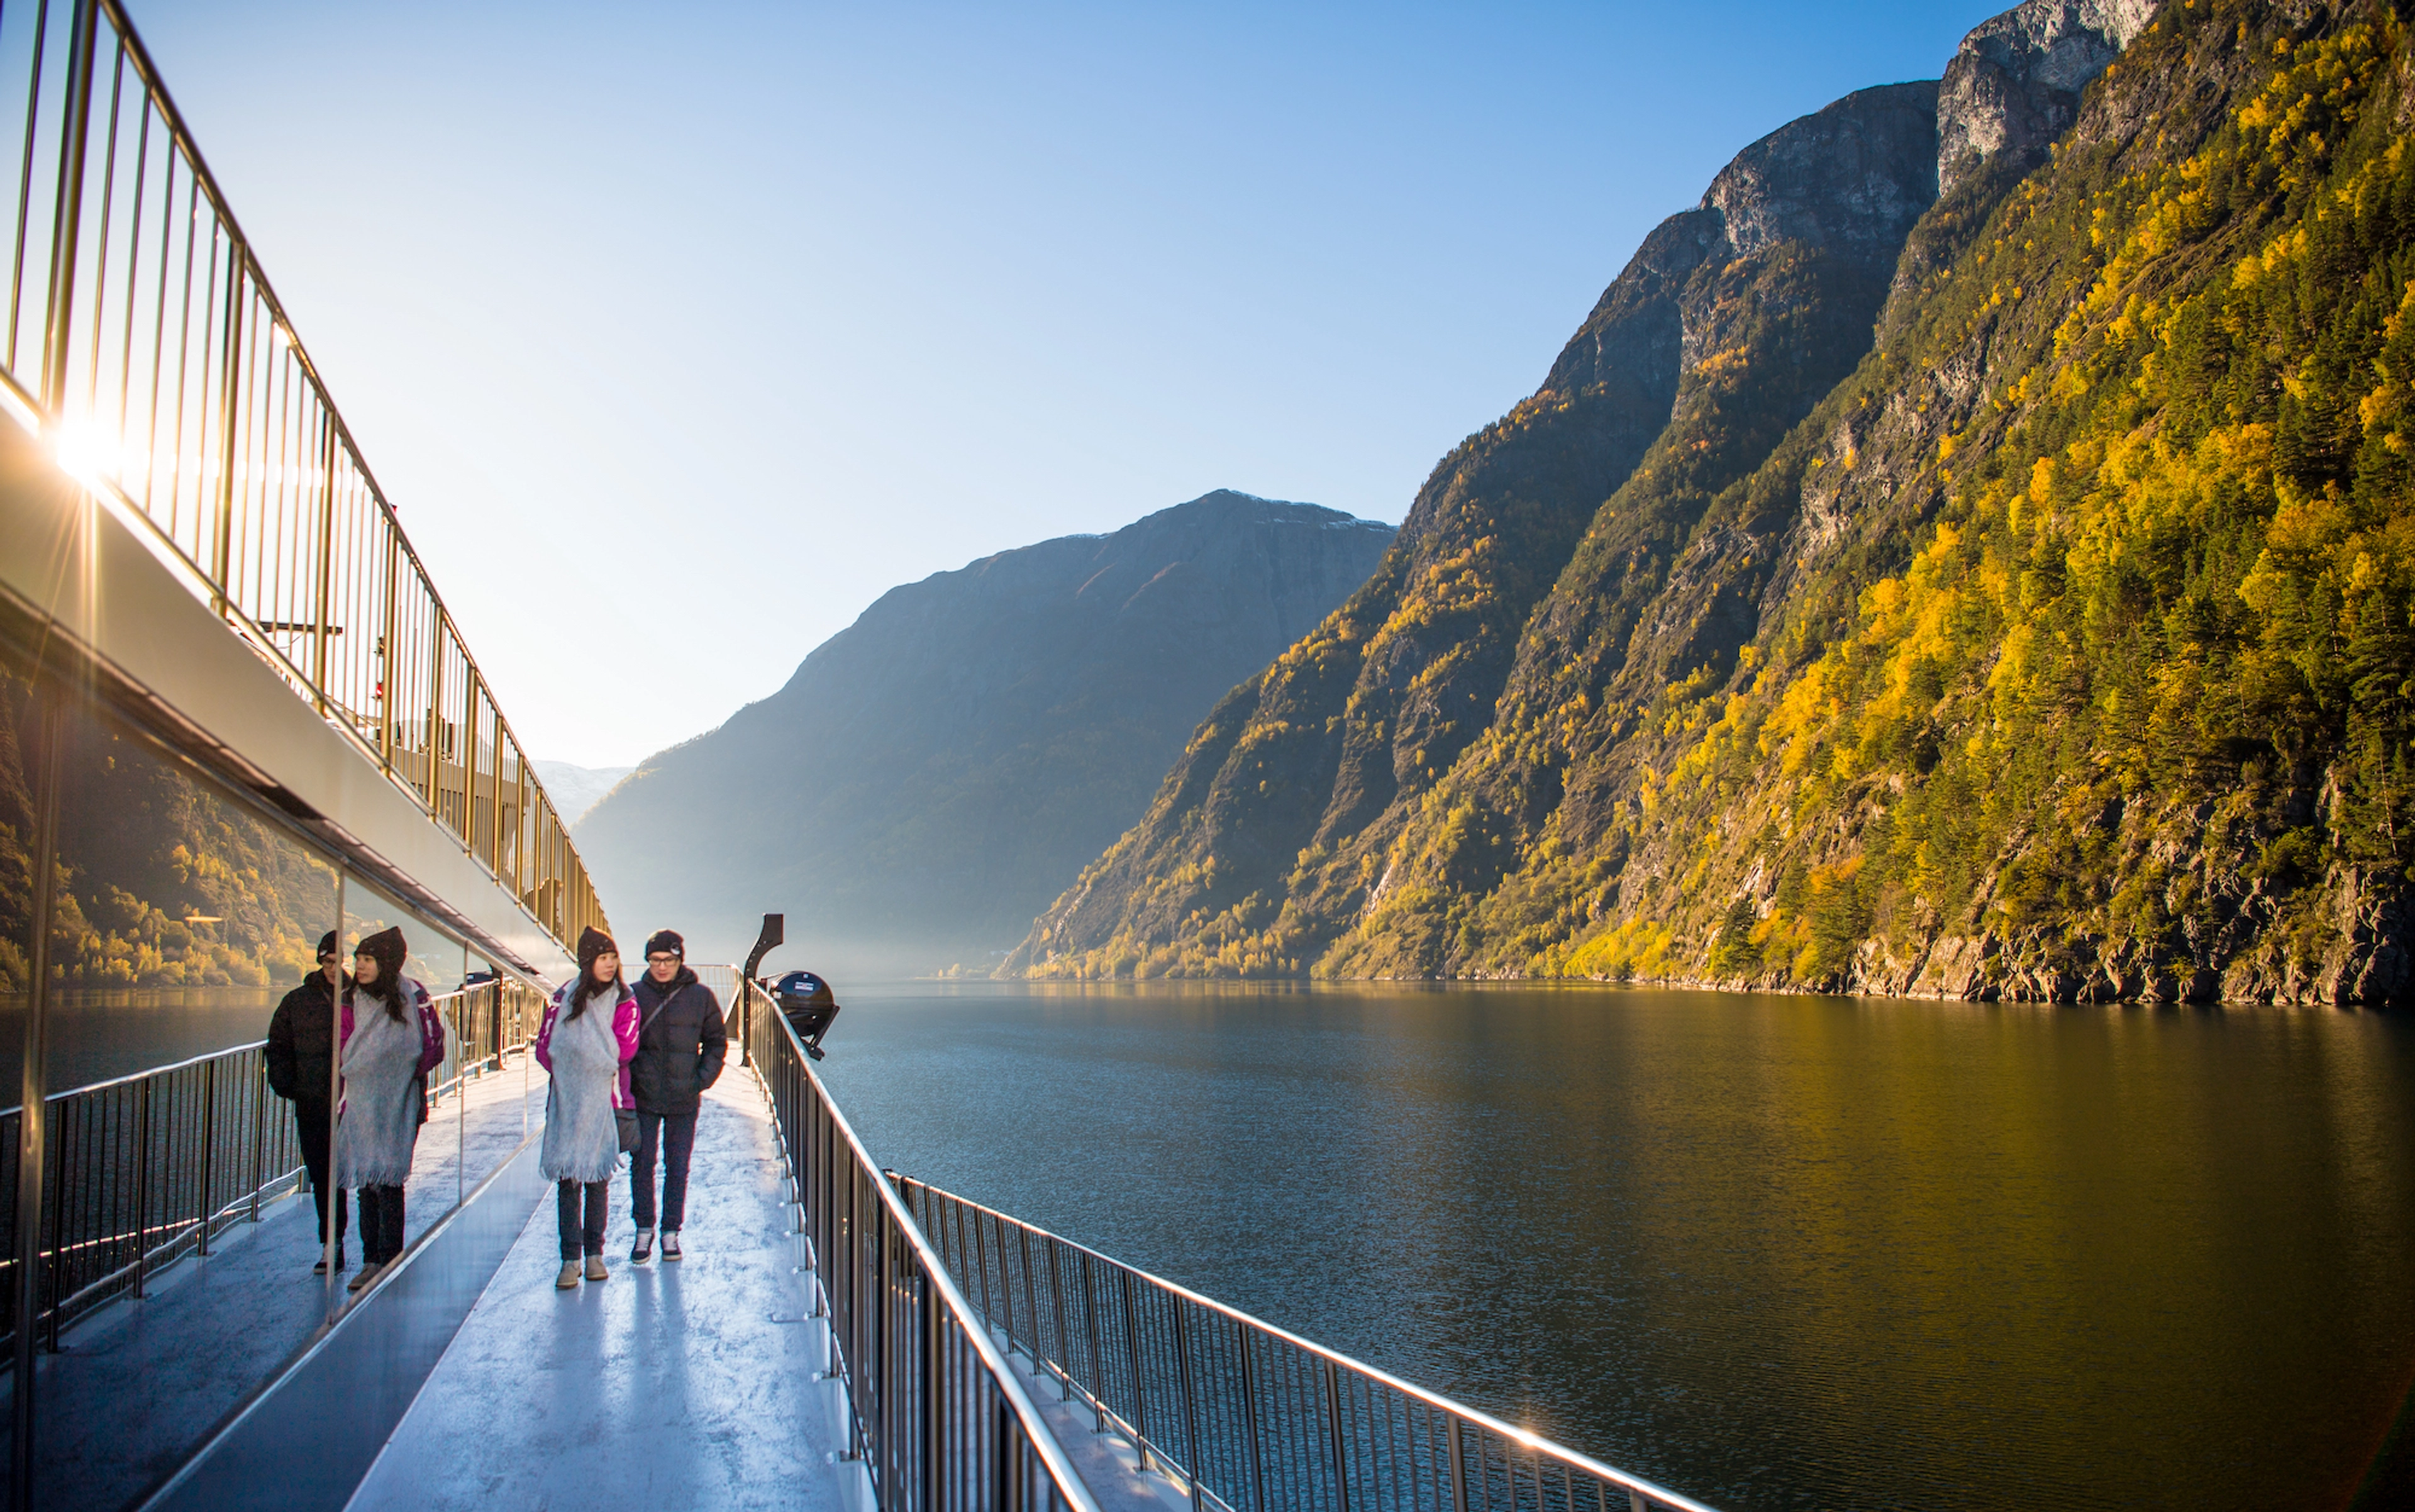 Electric fjord cruise on the Nærøyfjord - Go Viking with Fjord Tours , Flåm , Norway